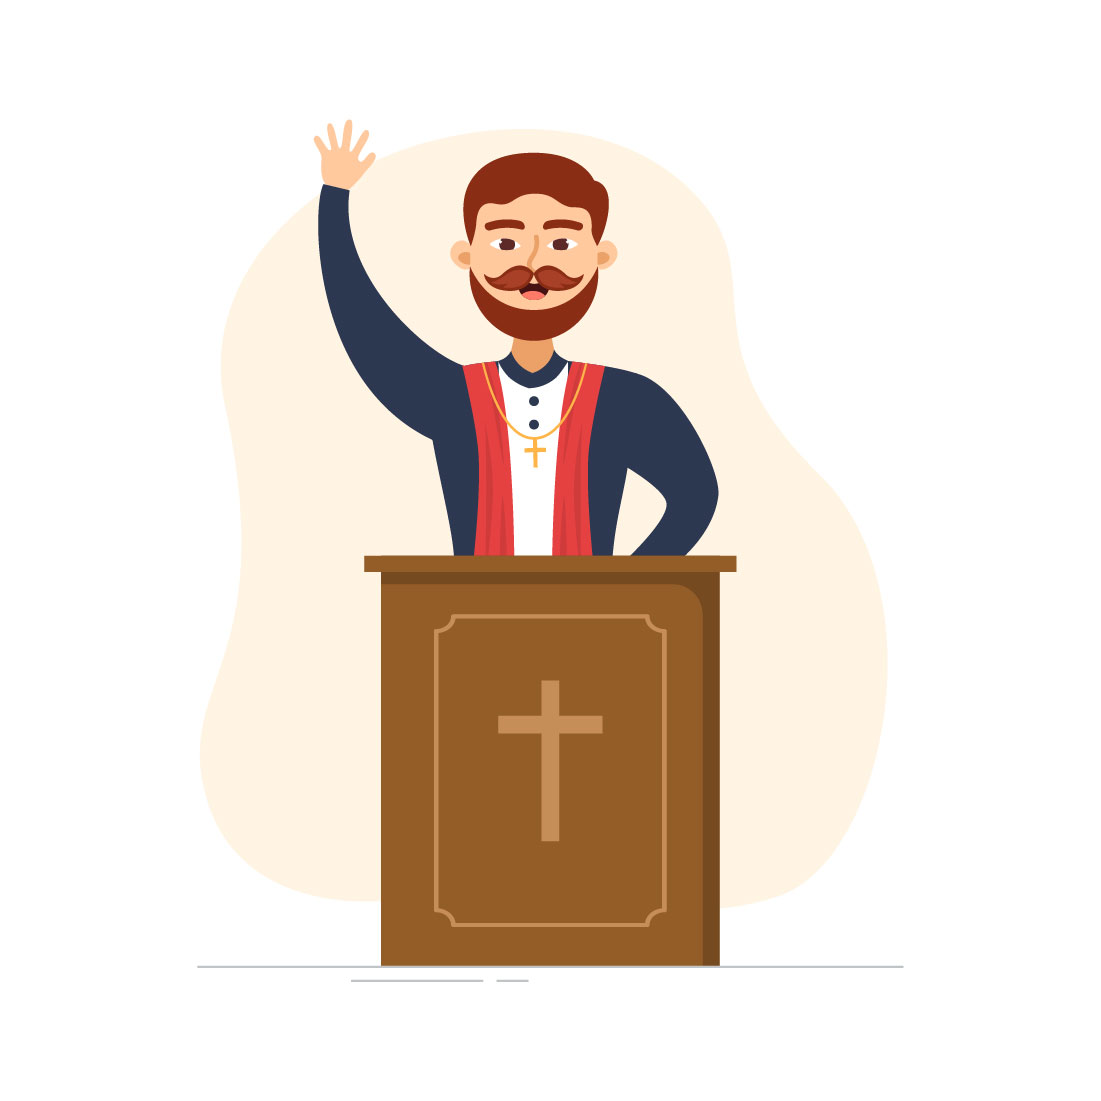 Pastor and Lutheran Church Illustration cover image.